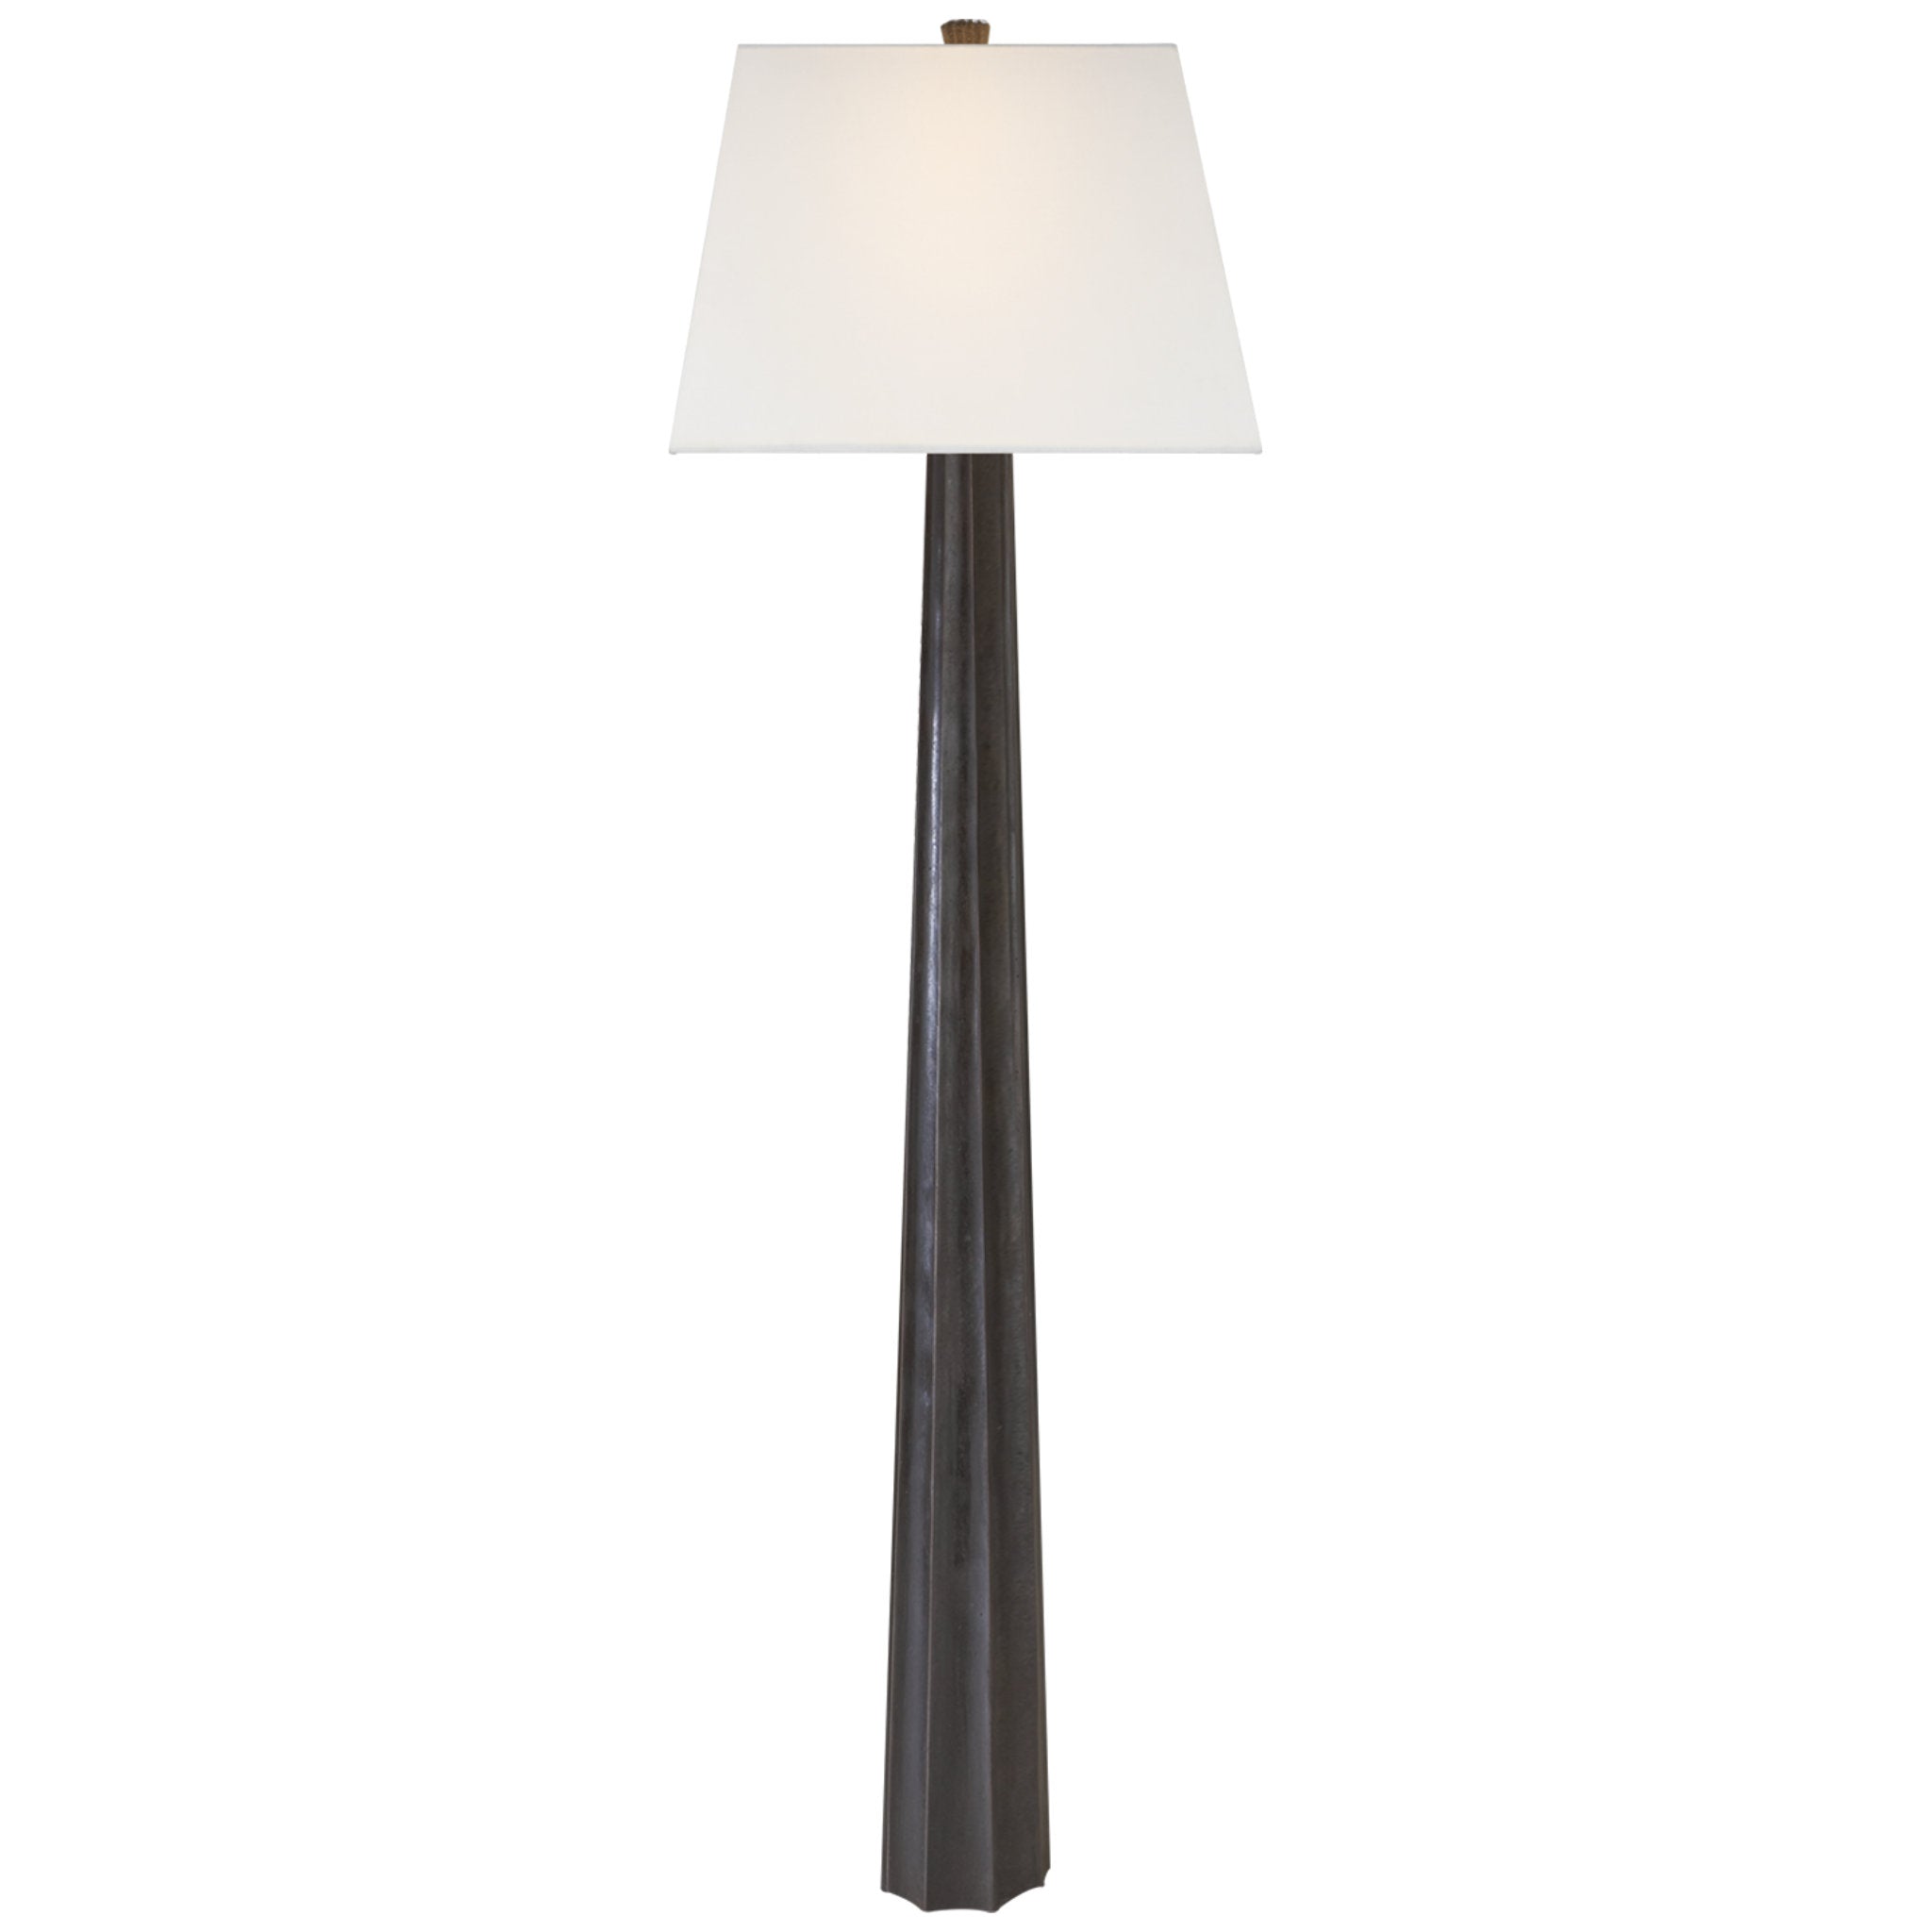 Chapman & Myers Fluted Spire Floor Lamp in Aged Iron with Linen Shade